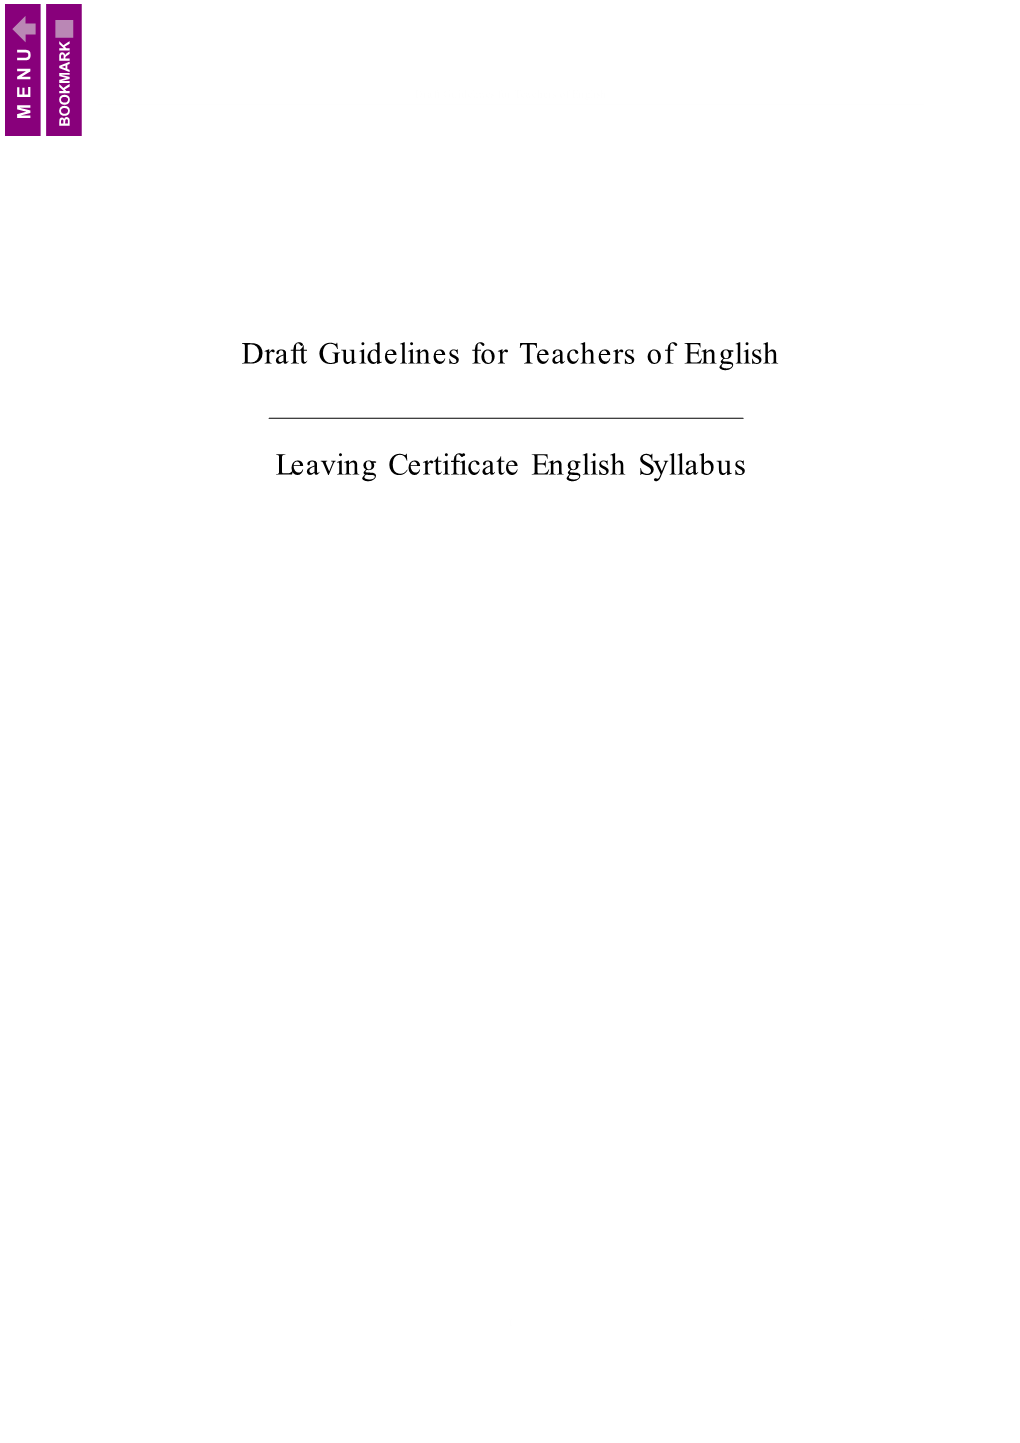 Draft Guidelines for Teachers of English